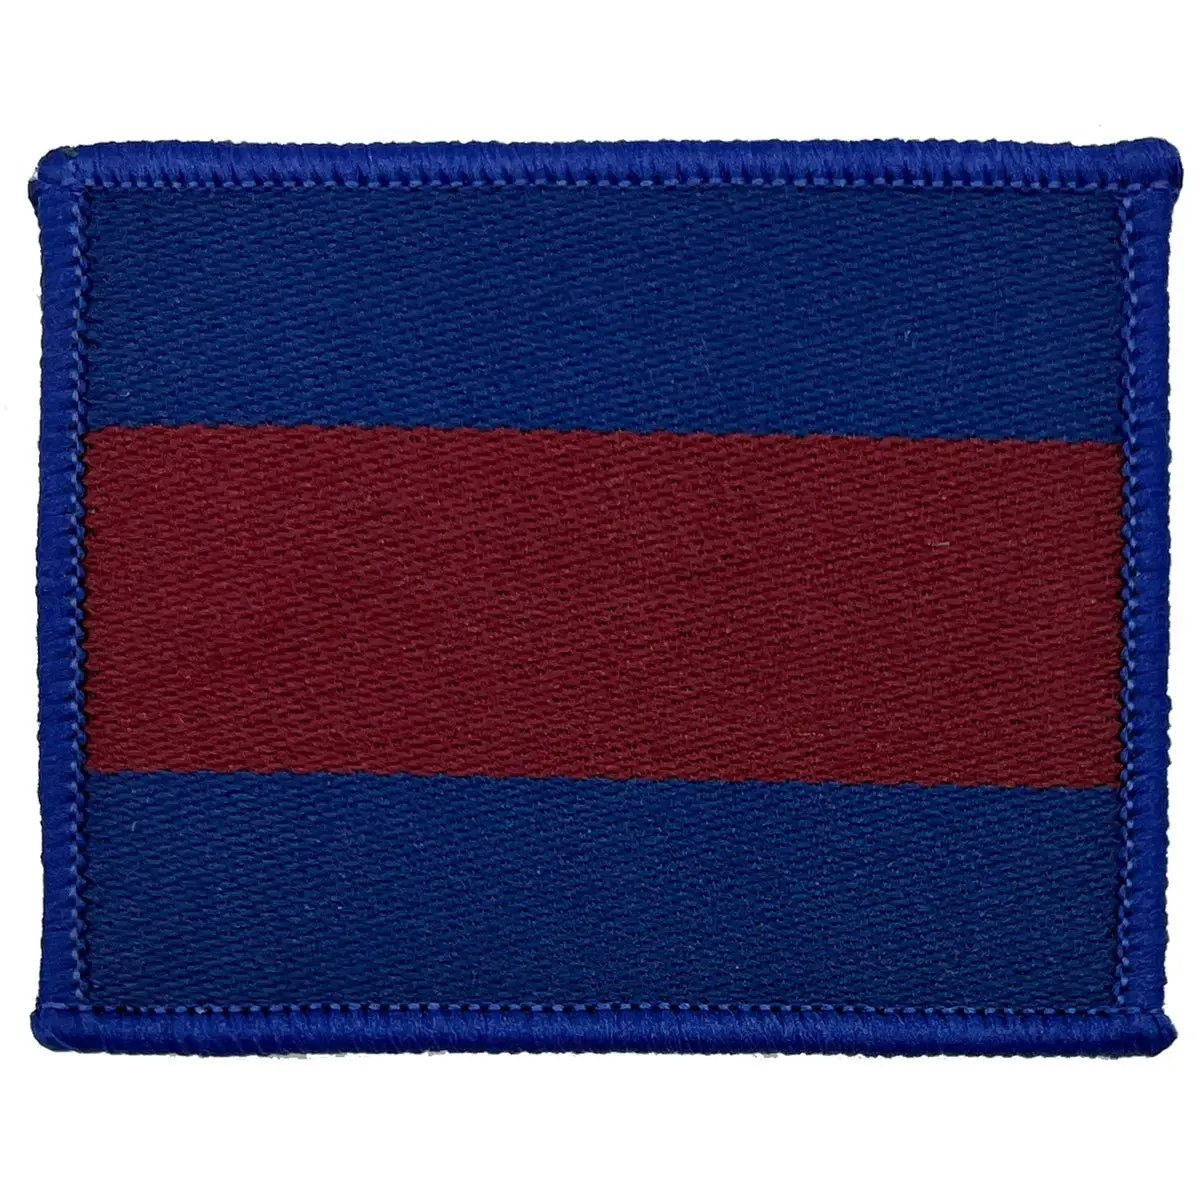 Household Division TRF - Iron or Sewn On Patch - John Bull Clothing